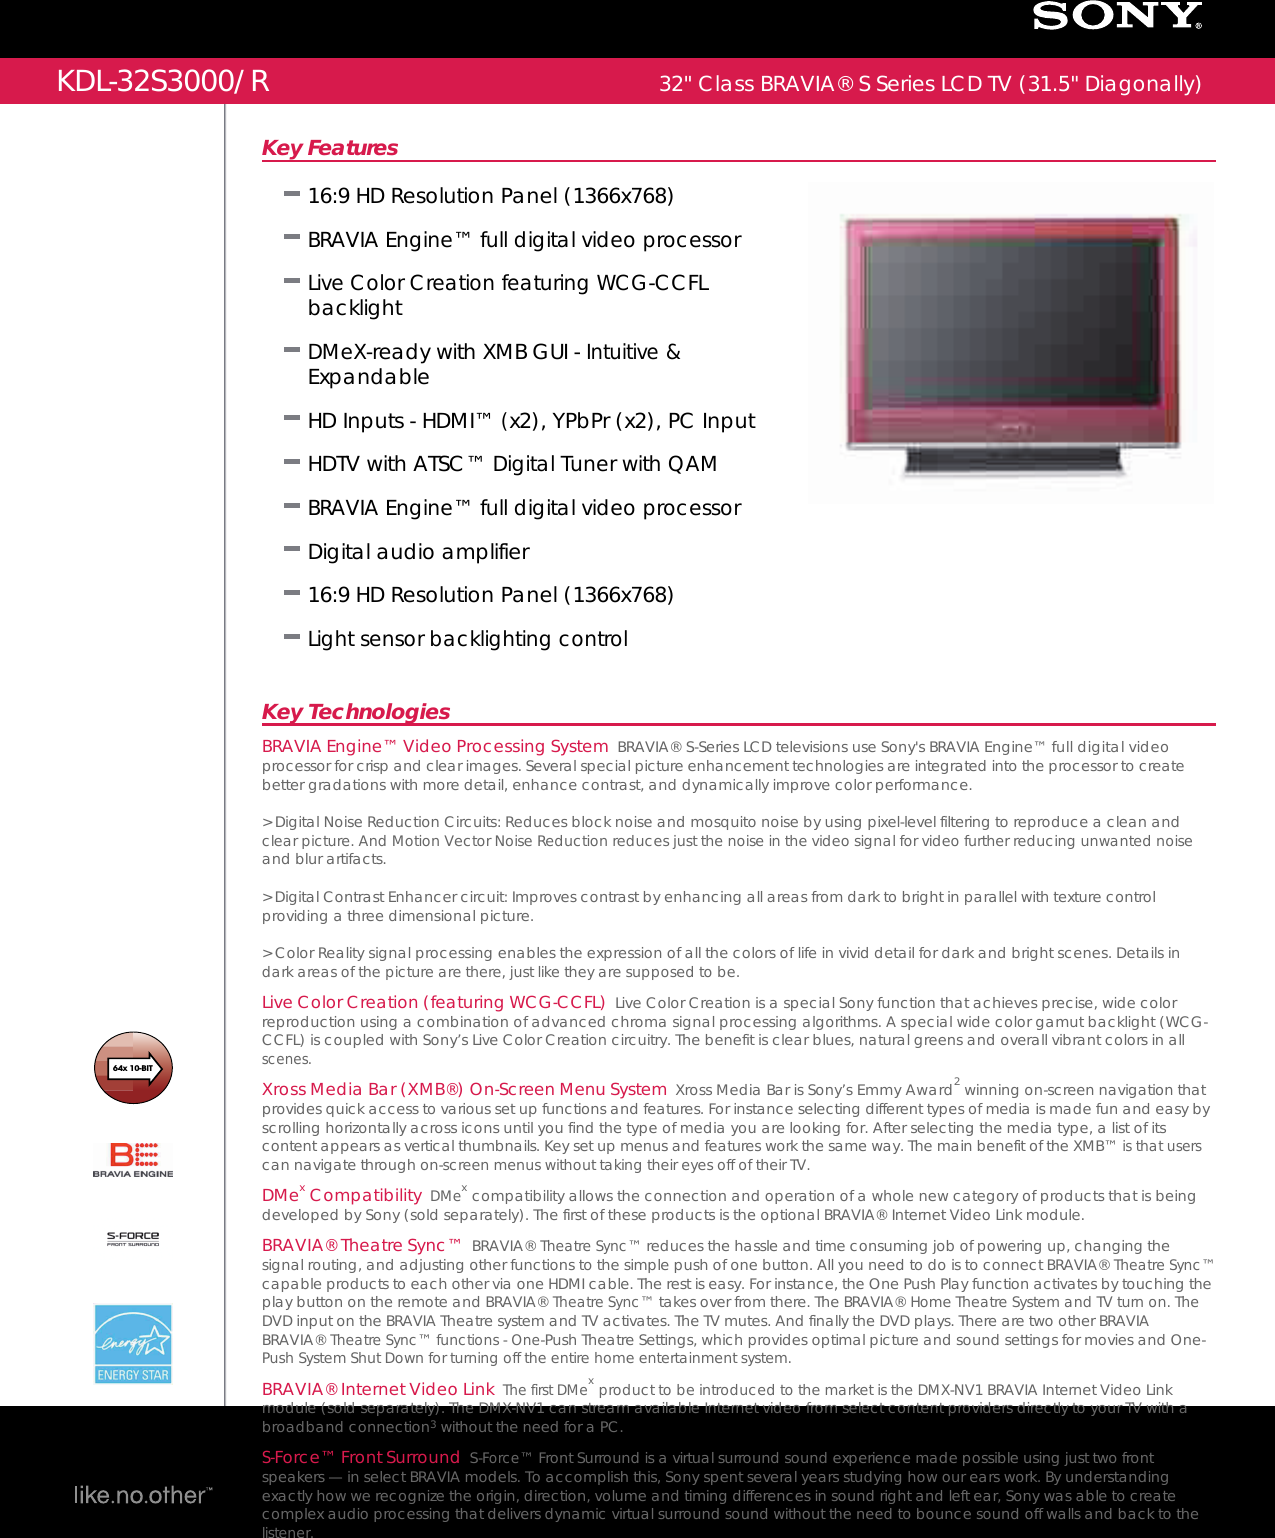 Page 1 of 2 - Sony KDL-32S3000 User Manual Marketing Specifications (Red ) KDL32S3000R Mksp